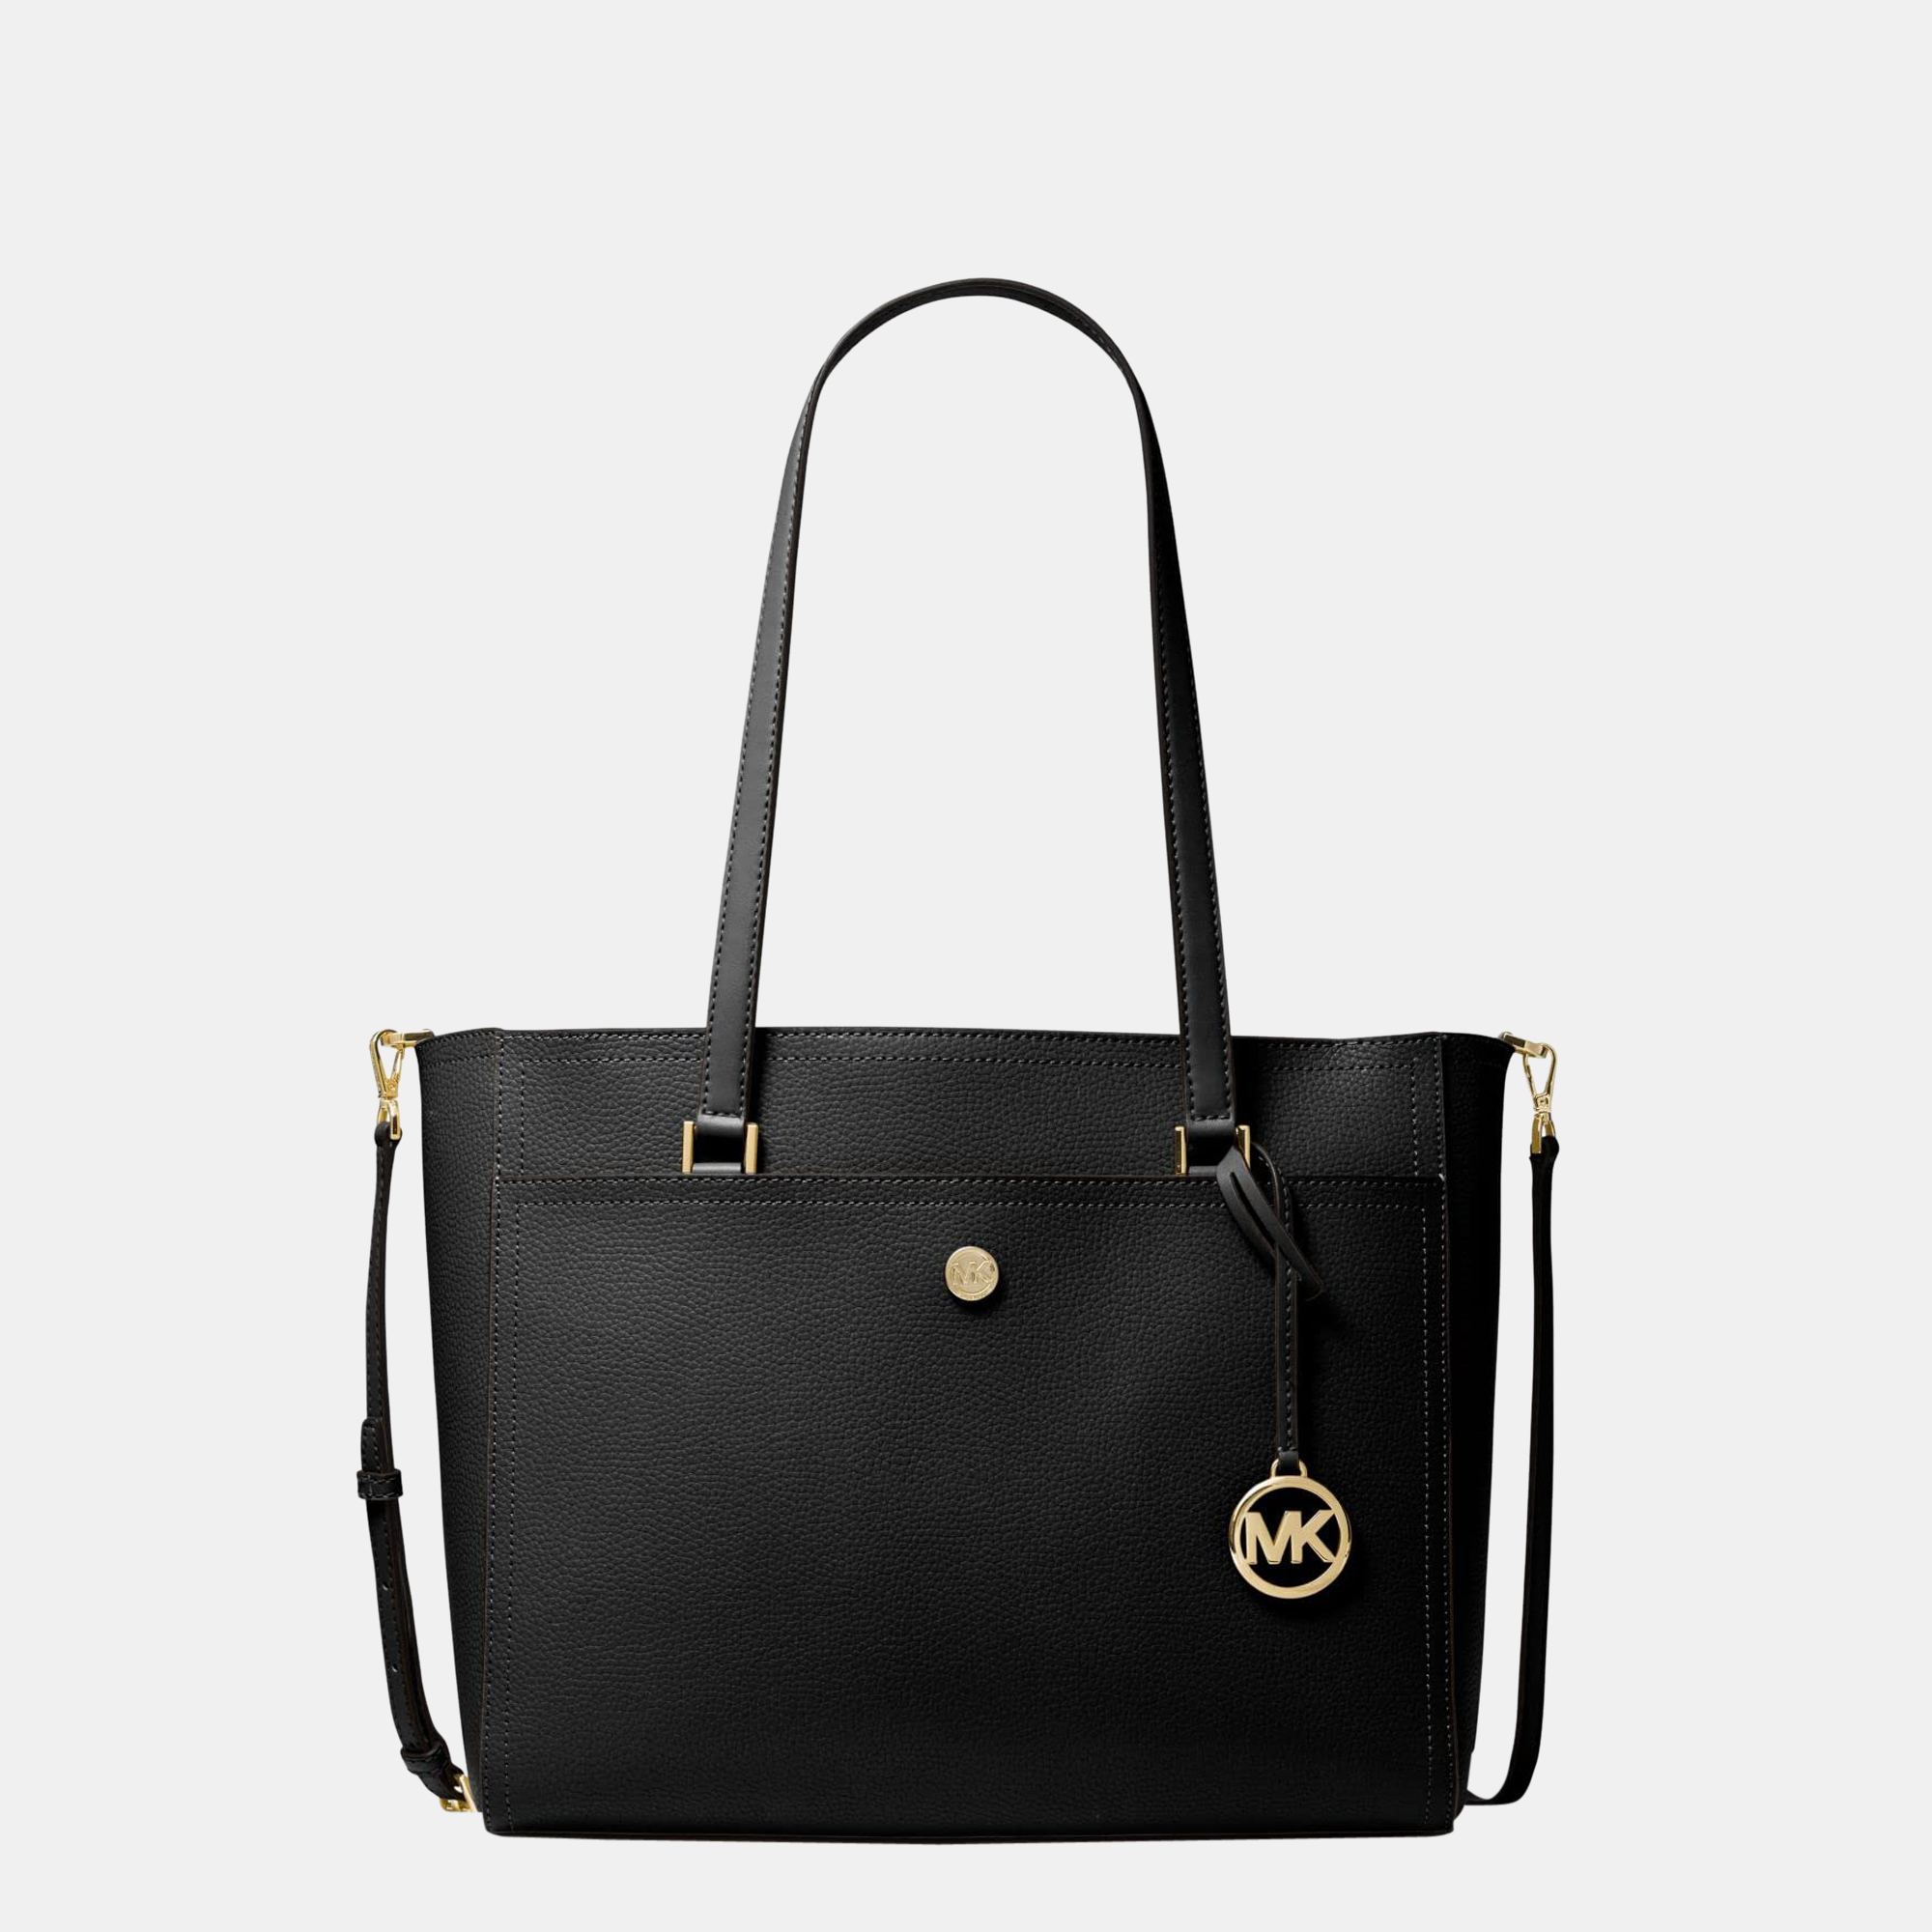 Pre-owned Michael Kors Black - Leather - Tote Bag